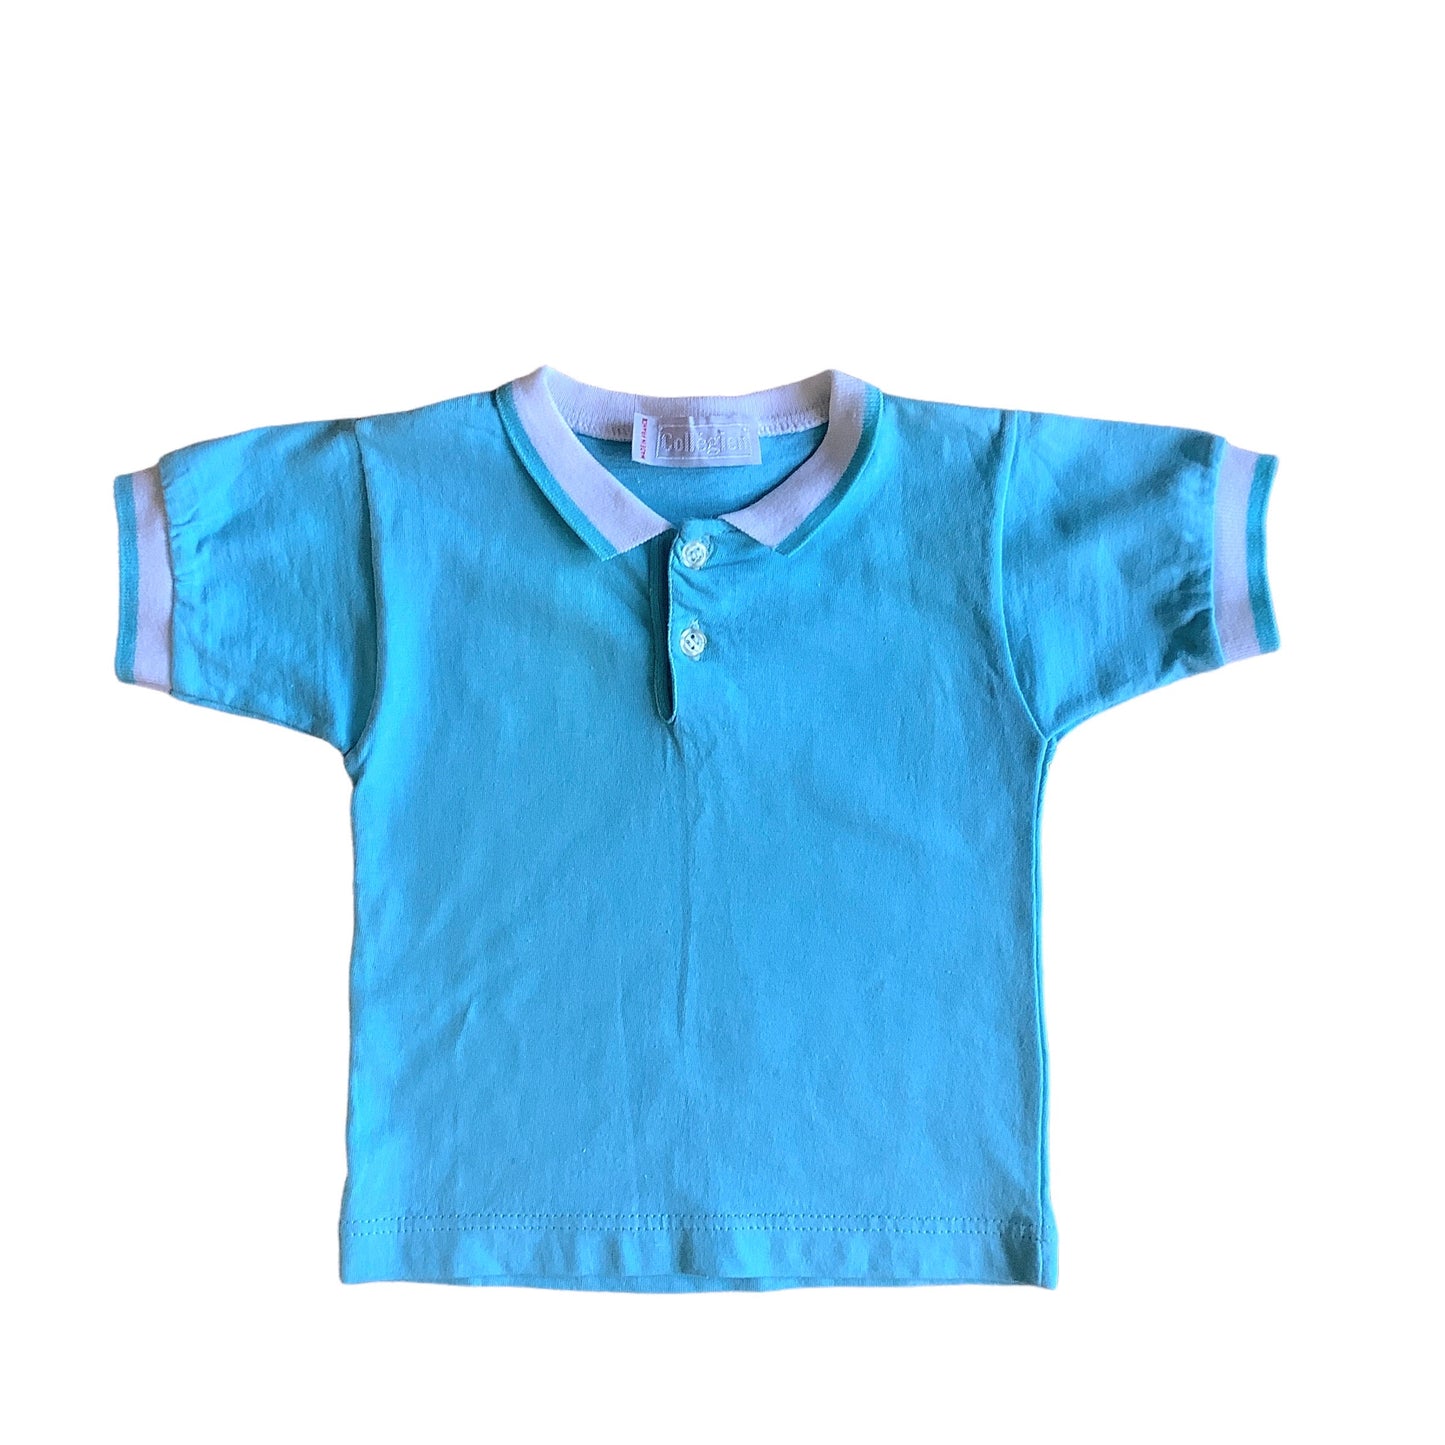 Vintage 70's Turquoise Polo  Top / 12-18M